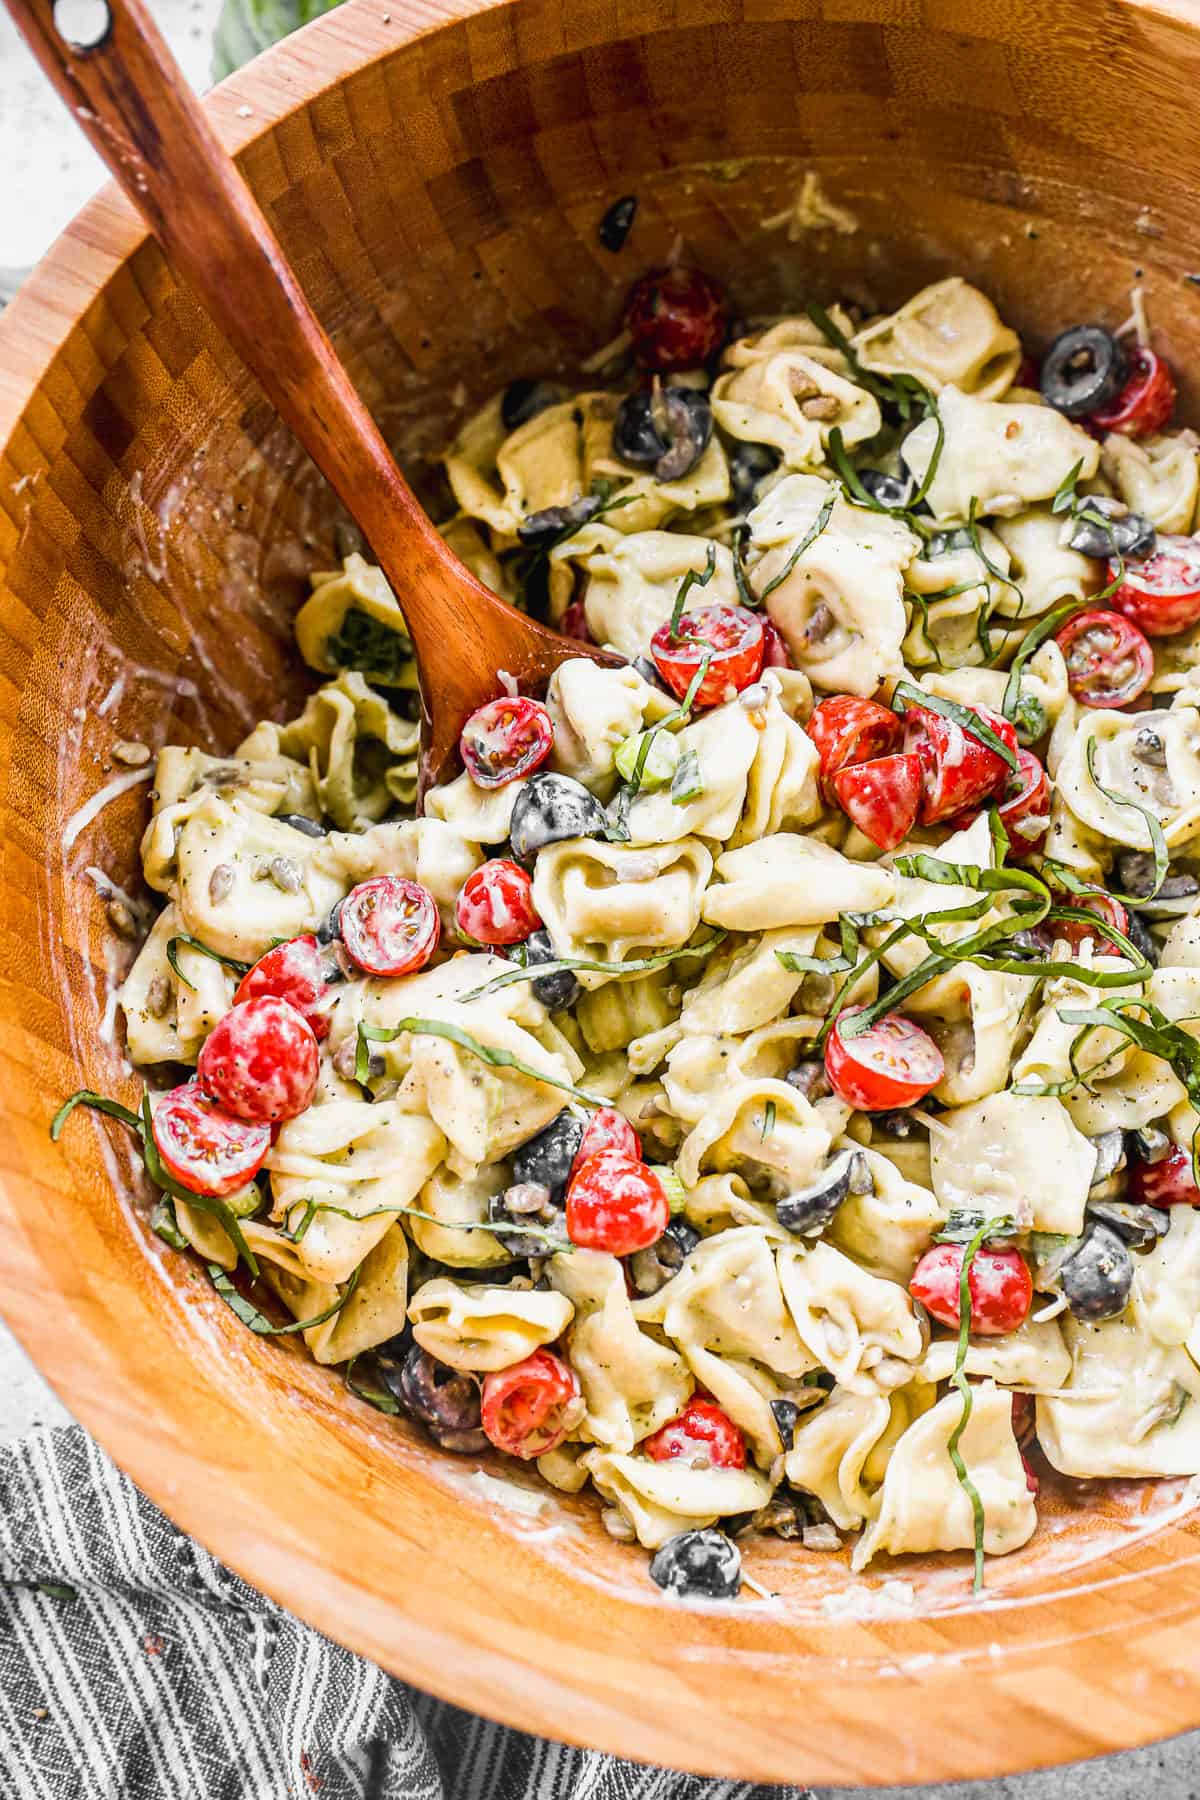 A close-up image of an easy Pesto Tortellini recipe with fresh basil, ready to serve.